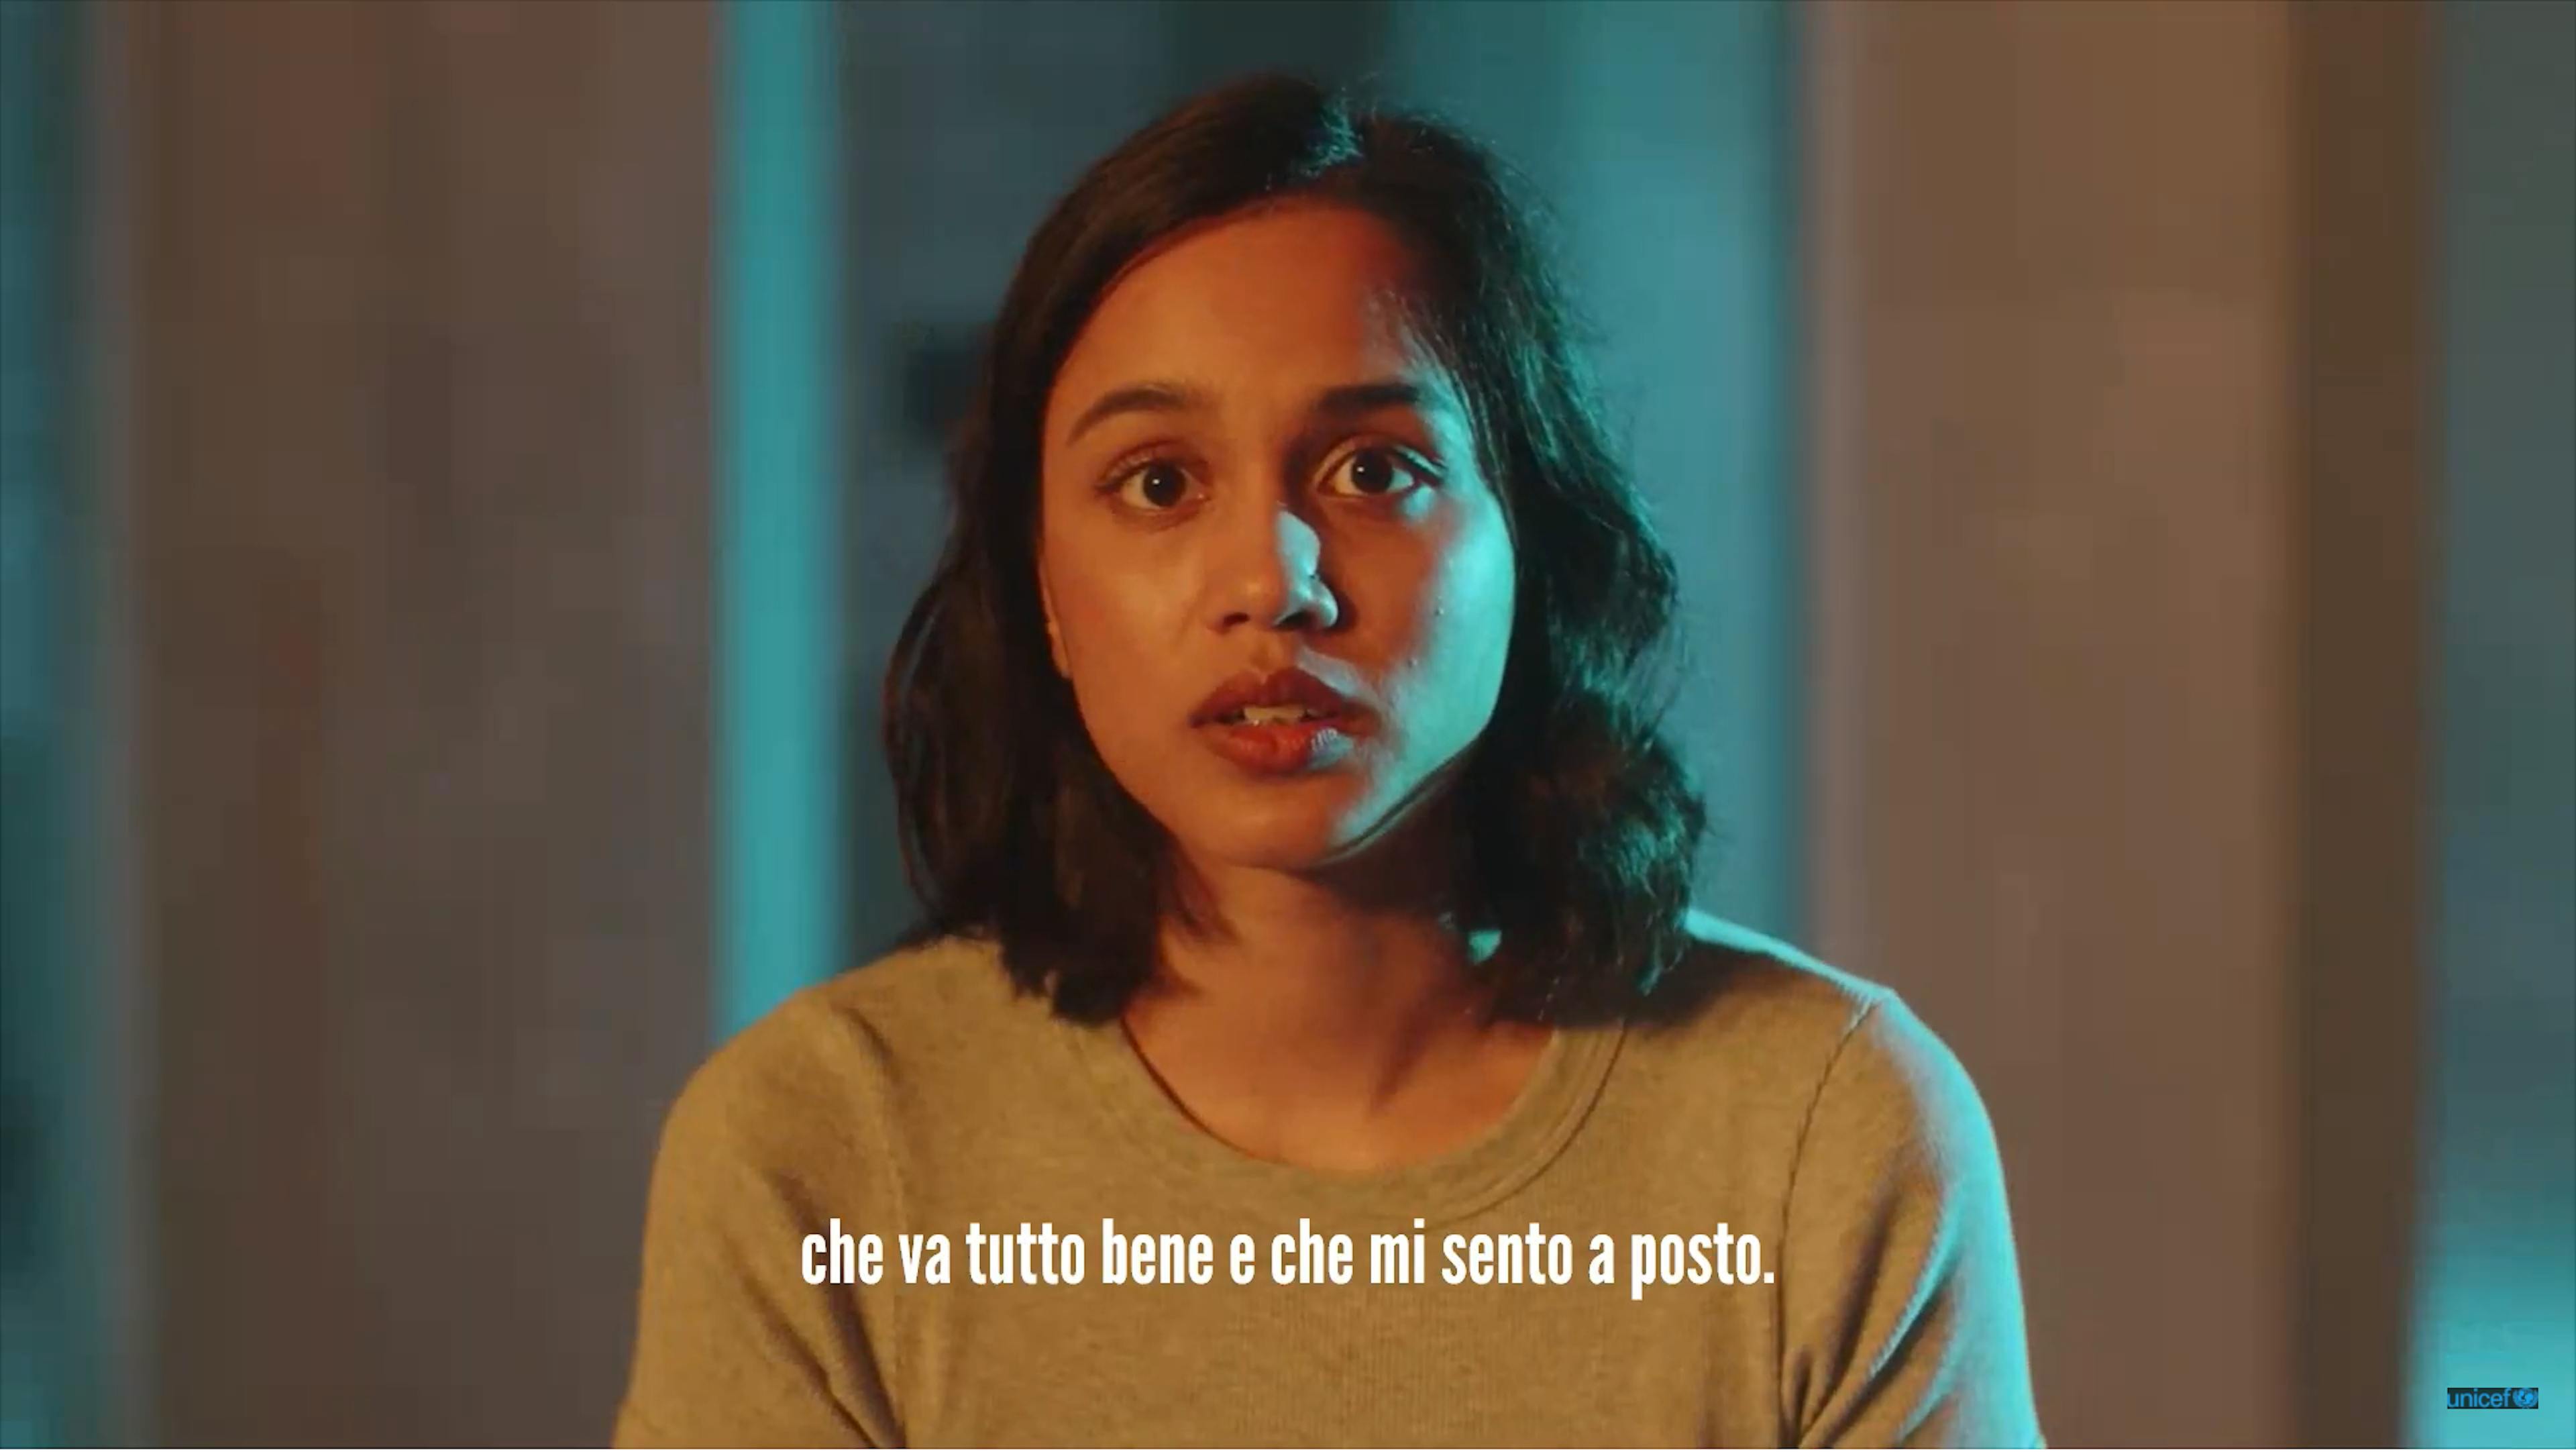 Onmymind campagna salute mentale - video Taz